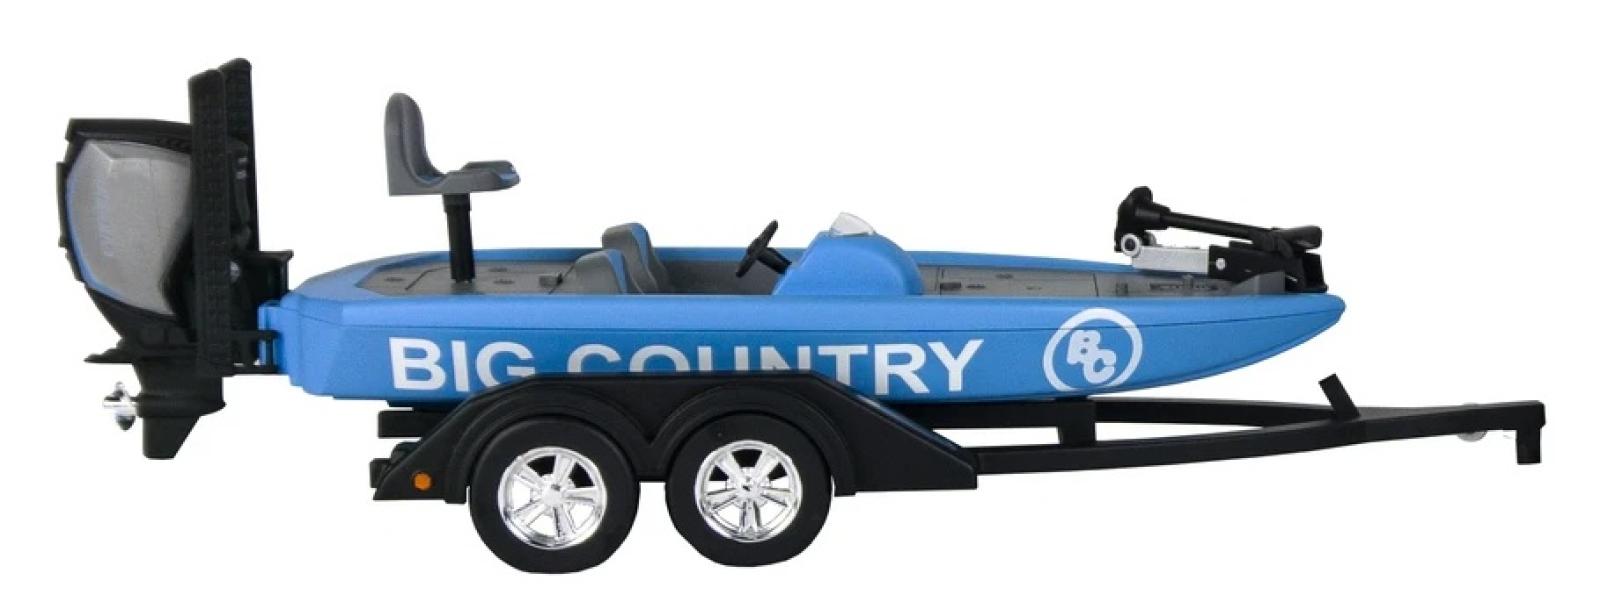 Big Country Farm Toys Bass Boat Right Side of Boat